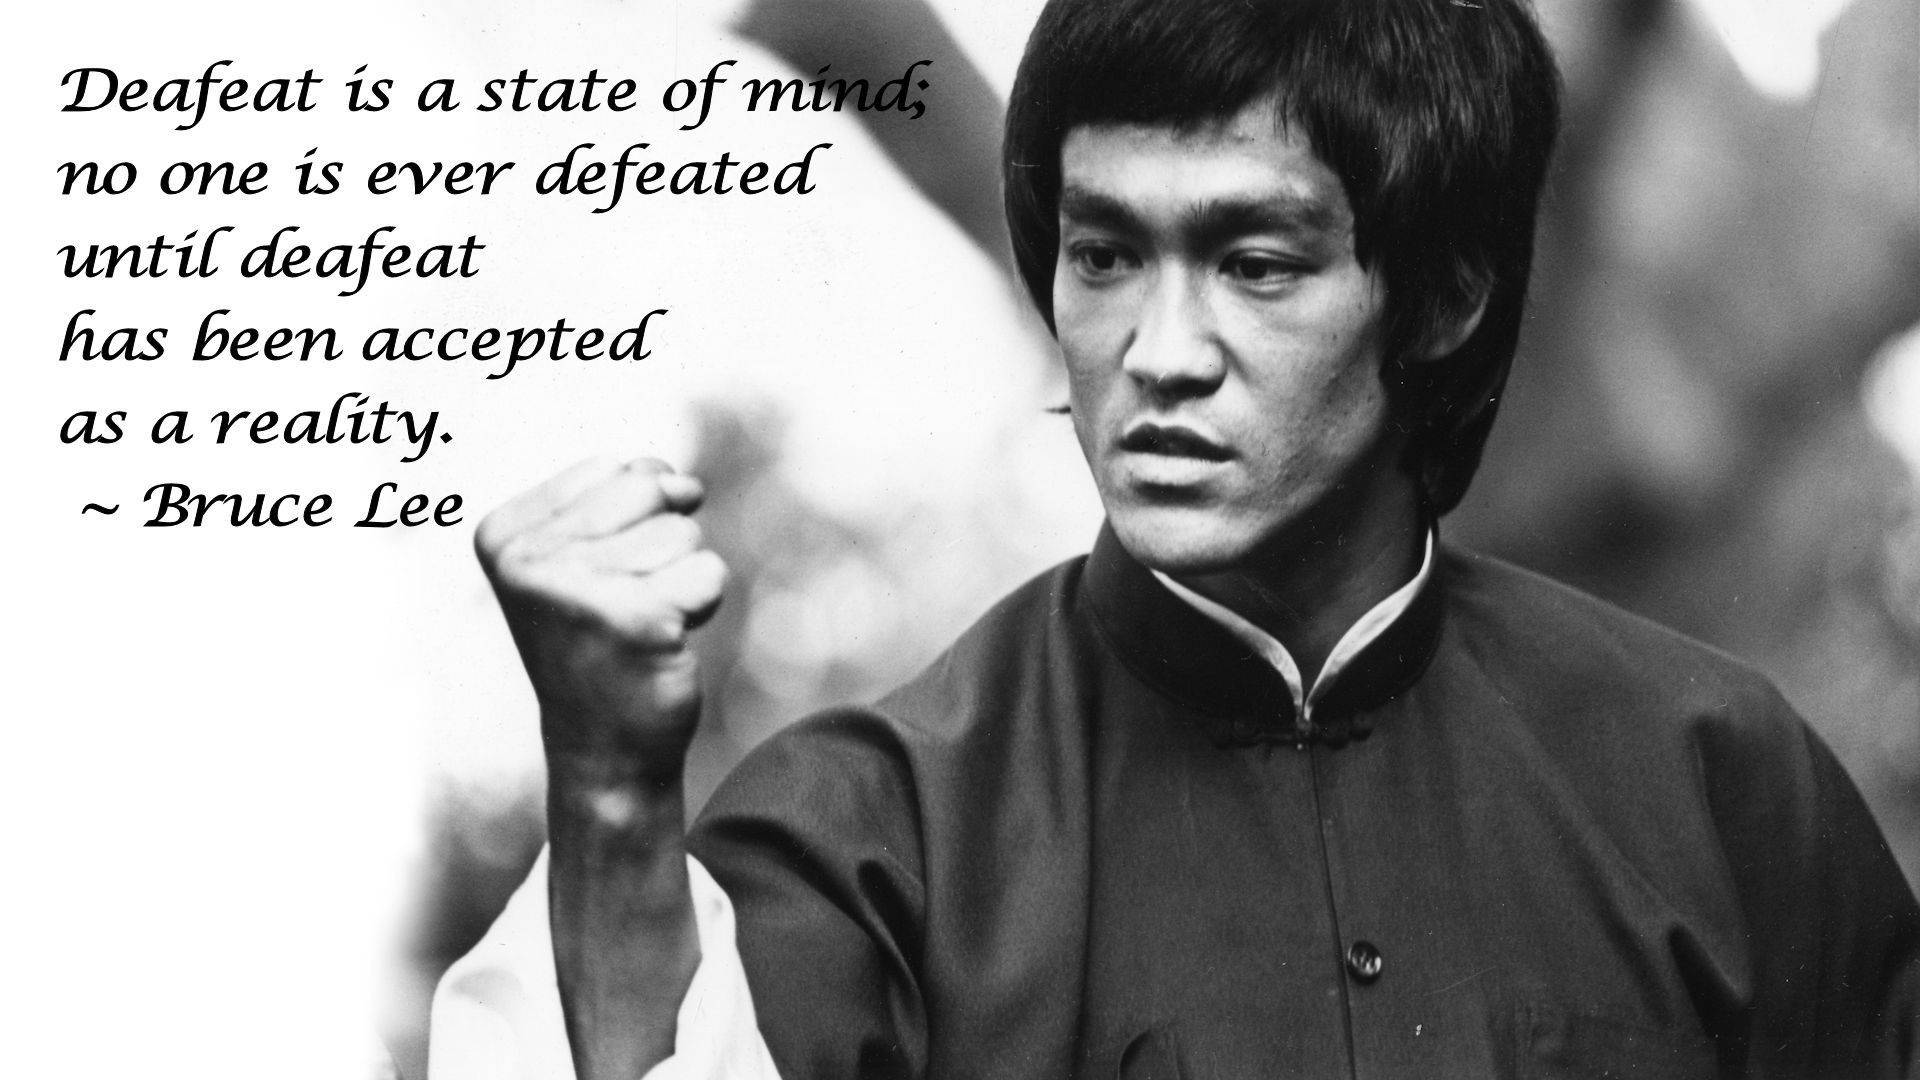 Bruce Lee Quote About Defeat Picture